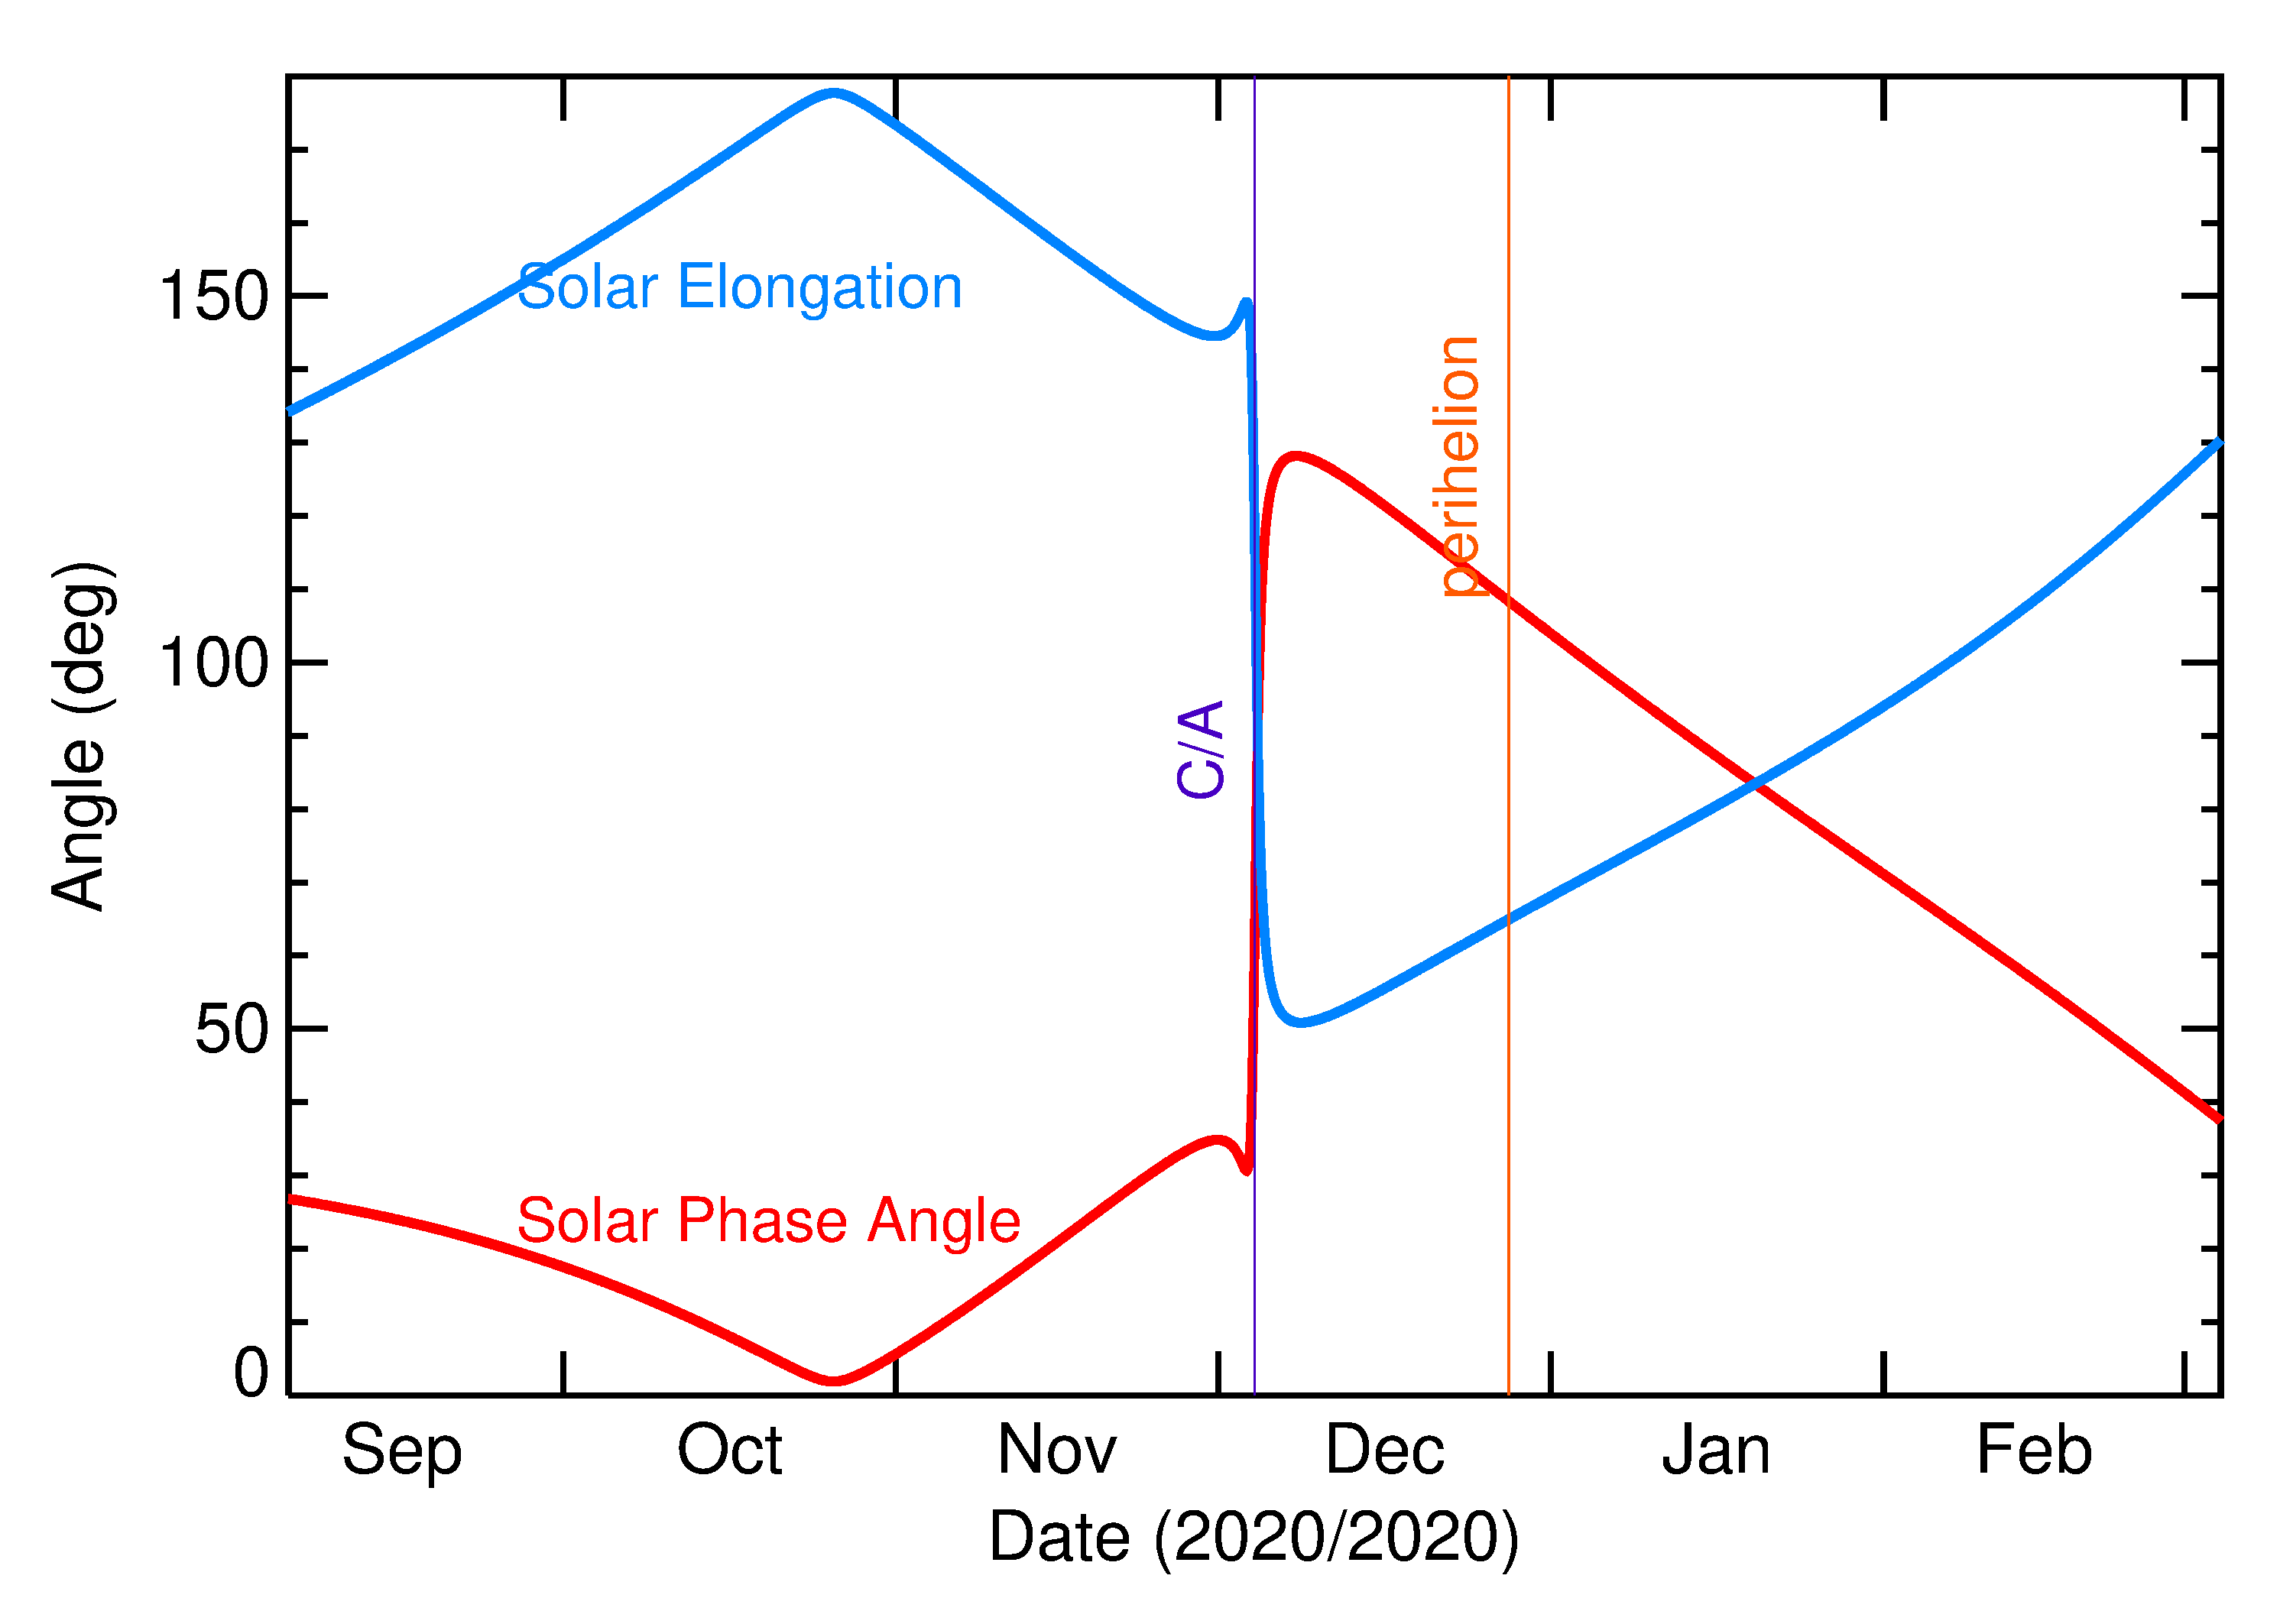 Solar Elongation and Solar Phase Angle of 2020 VZ6 in the months around closest approach